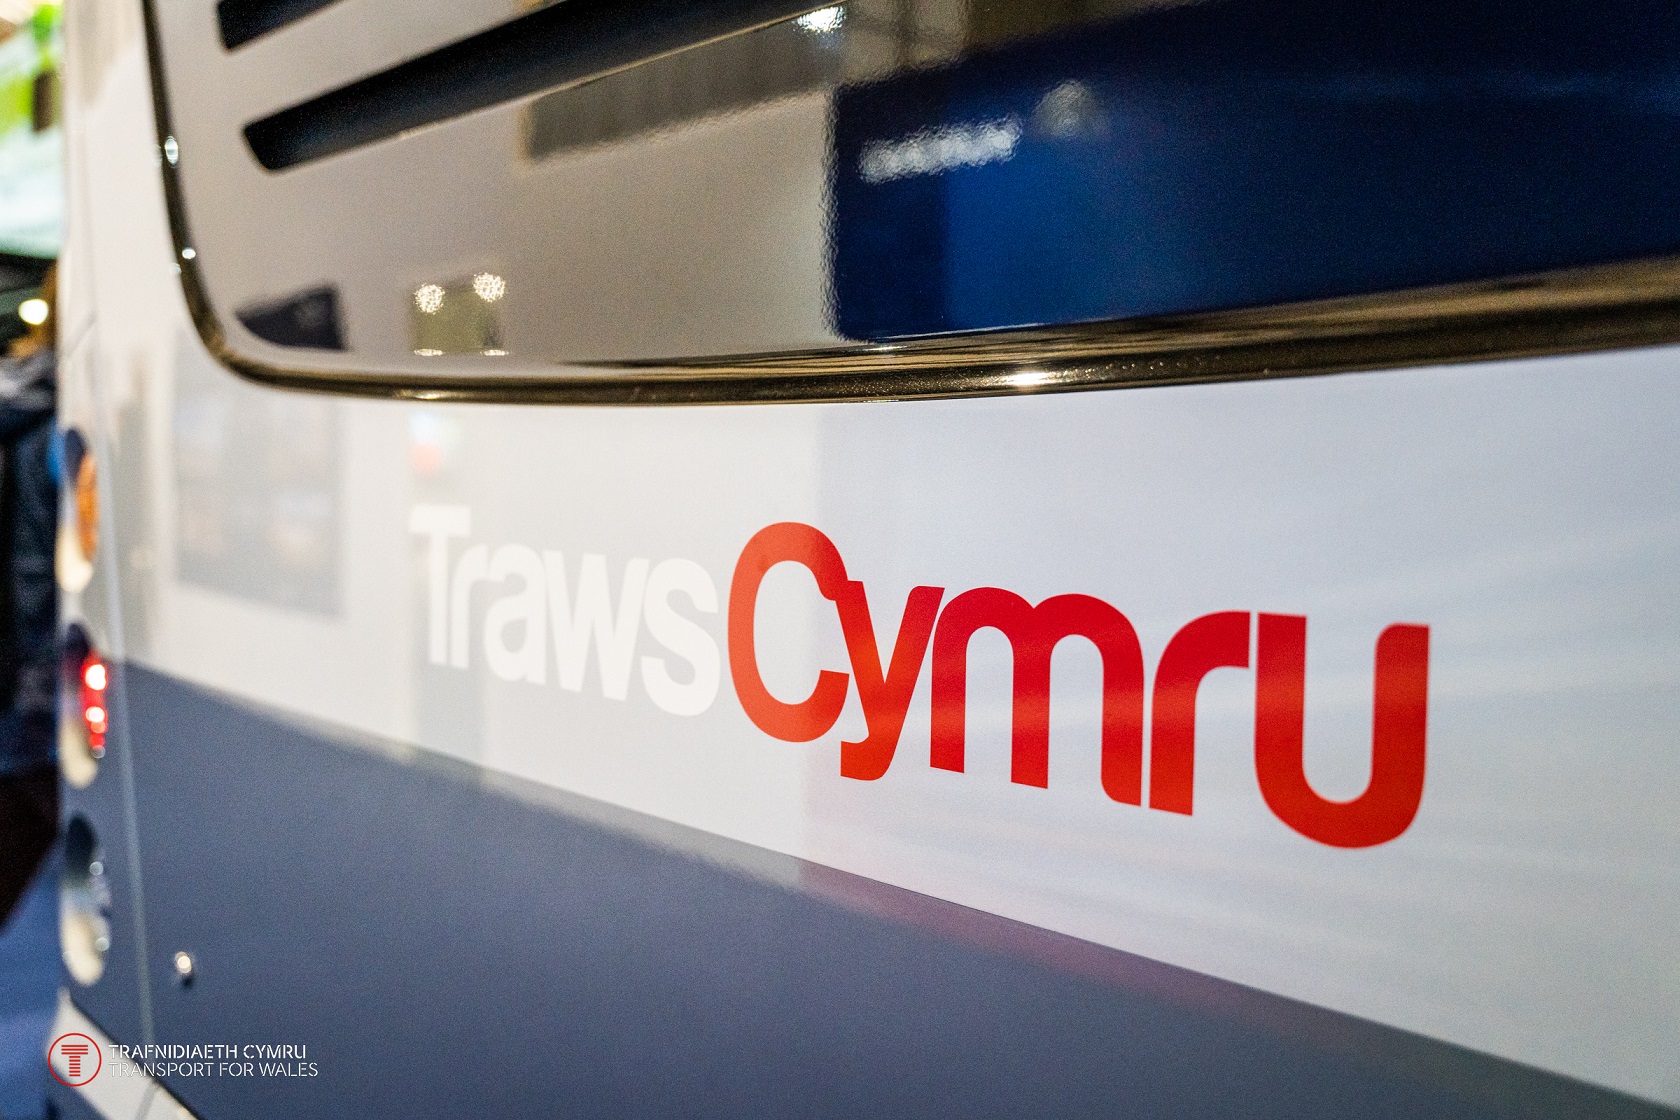 TrawsCymru route T8 launched in North Wales